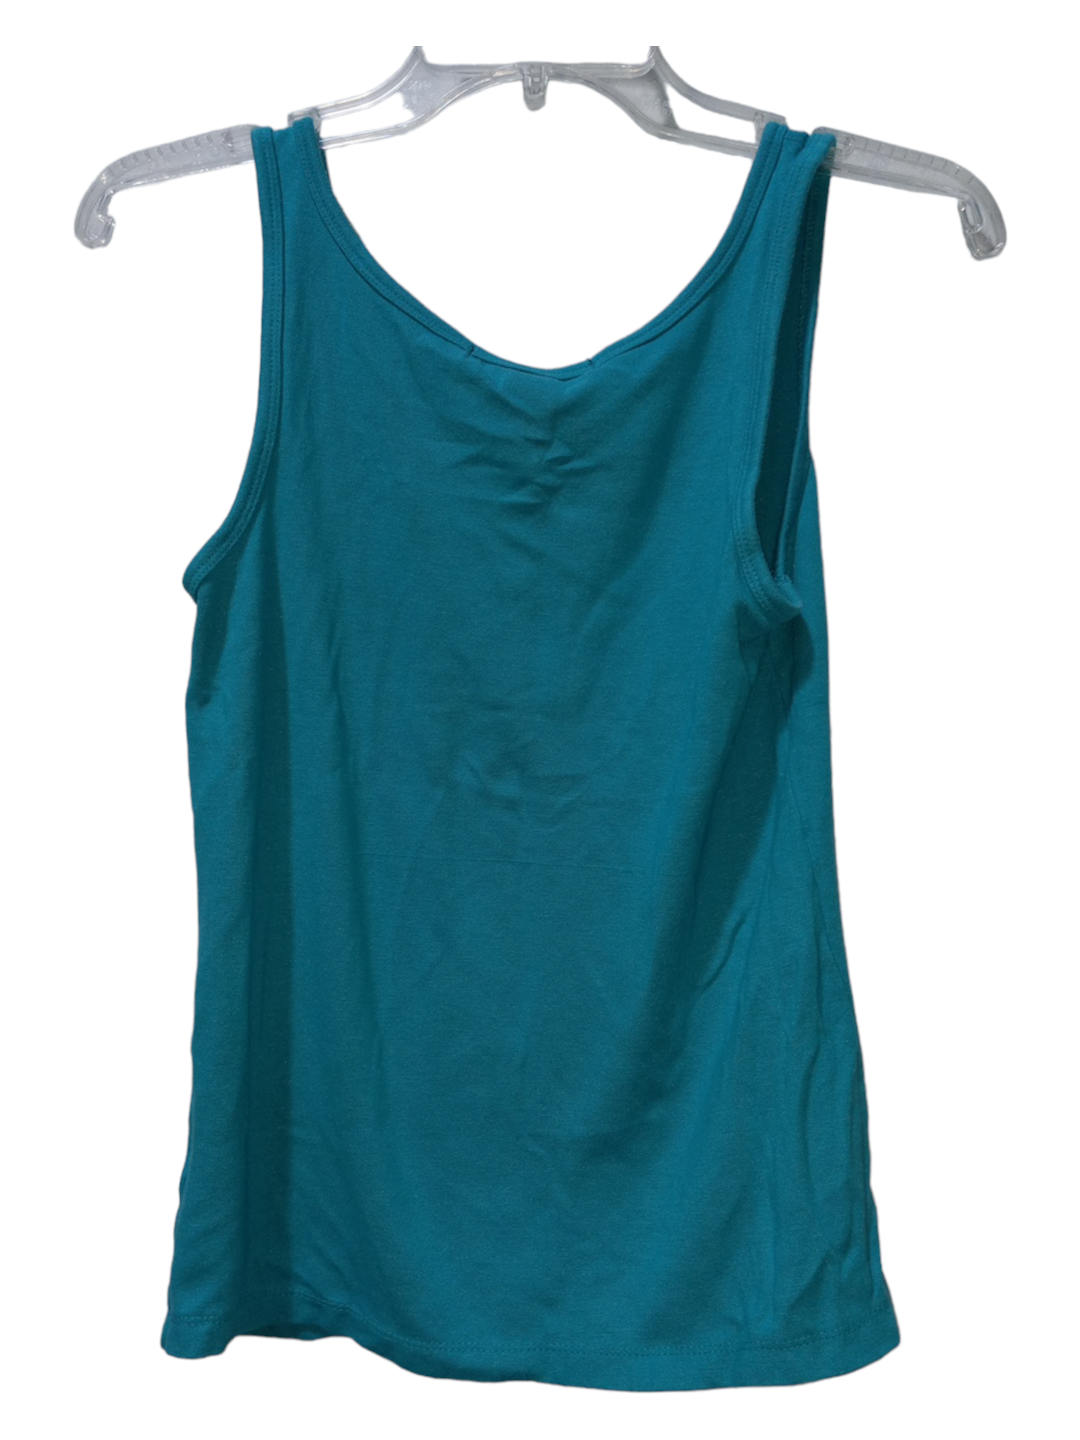 Green Tank Top French Laundry, Size M